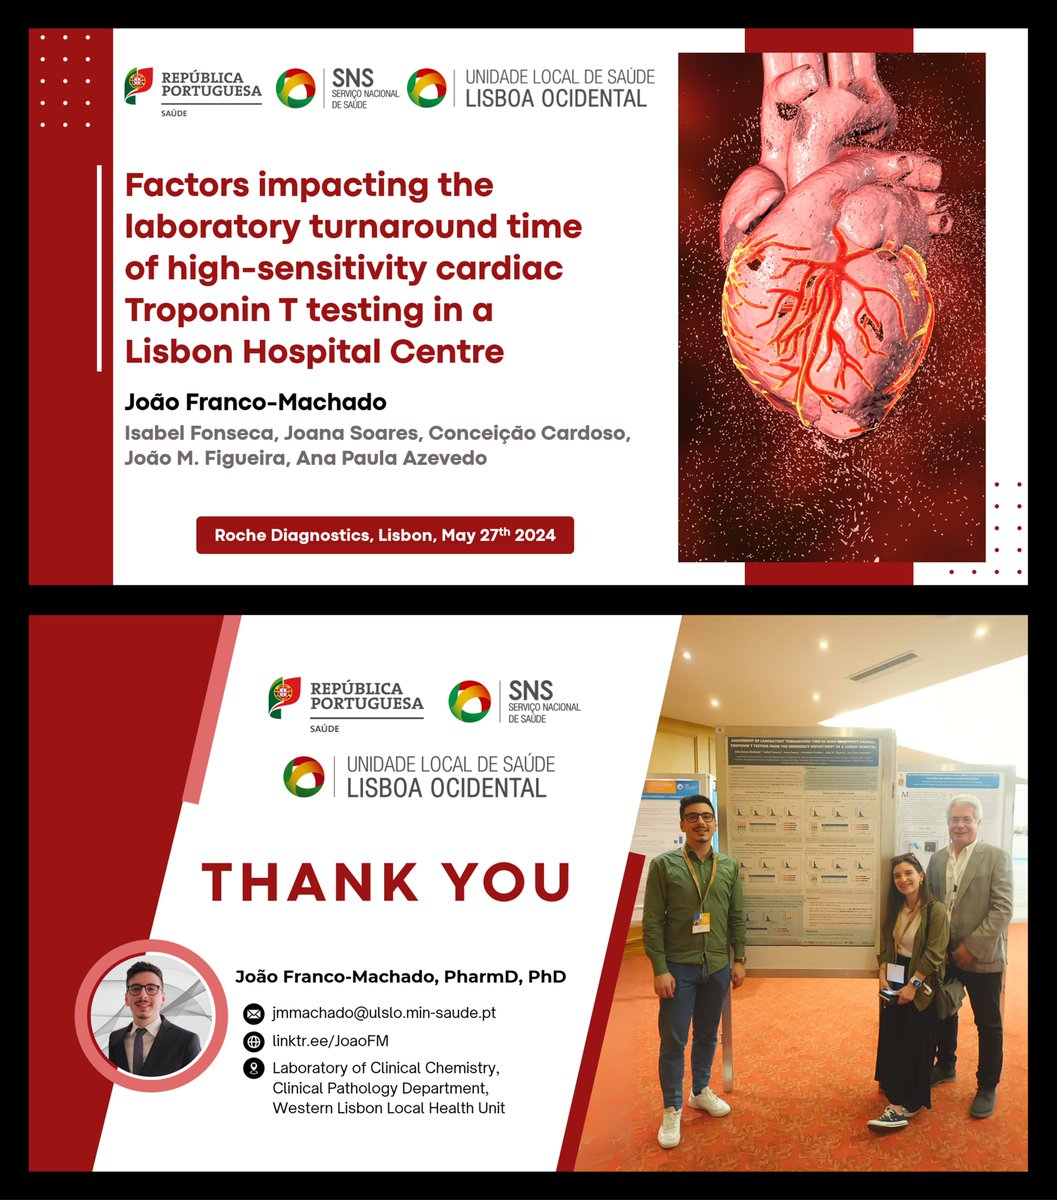 Thank you @RocheDia Portugal for the invitation to share our work on the evaluation of factors imparing the turnaround time of cardiac troponin measurment for diagnosis of acute myocardial infarction, paving the way to further collaborations! #clinicalchemistry #AcademicTwitter